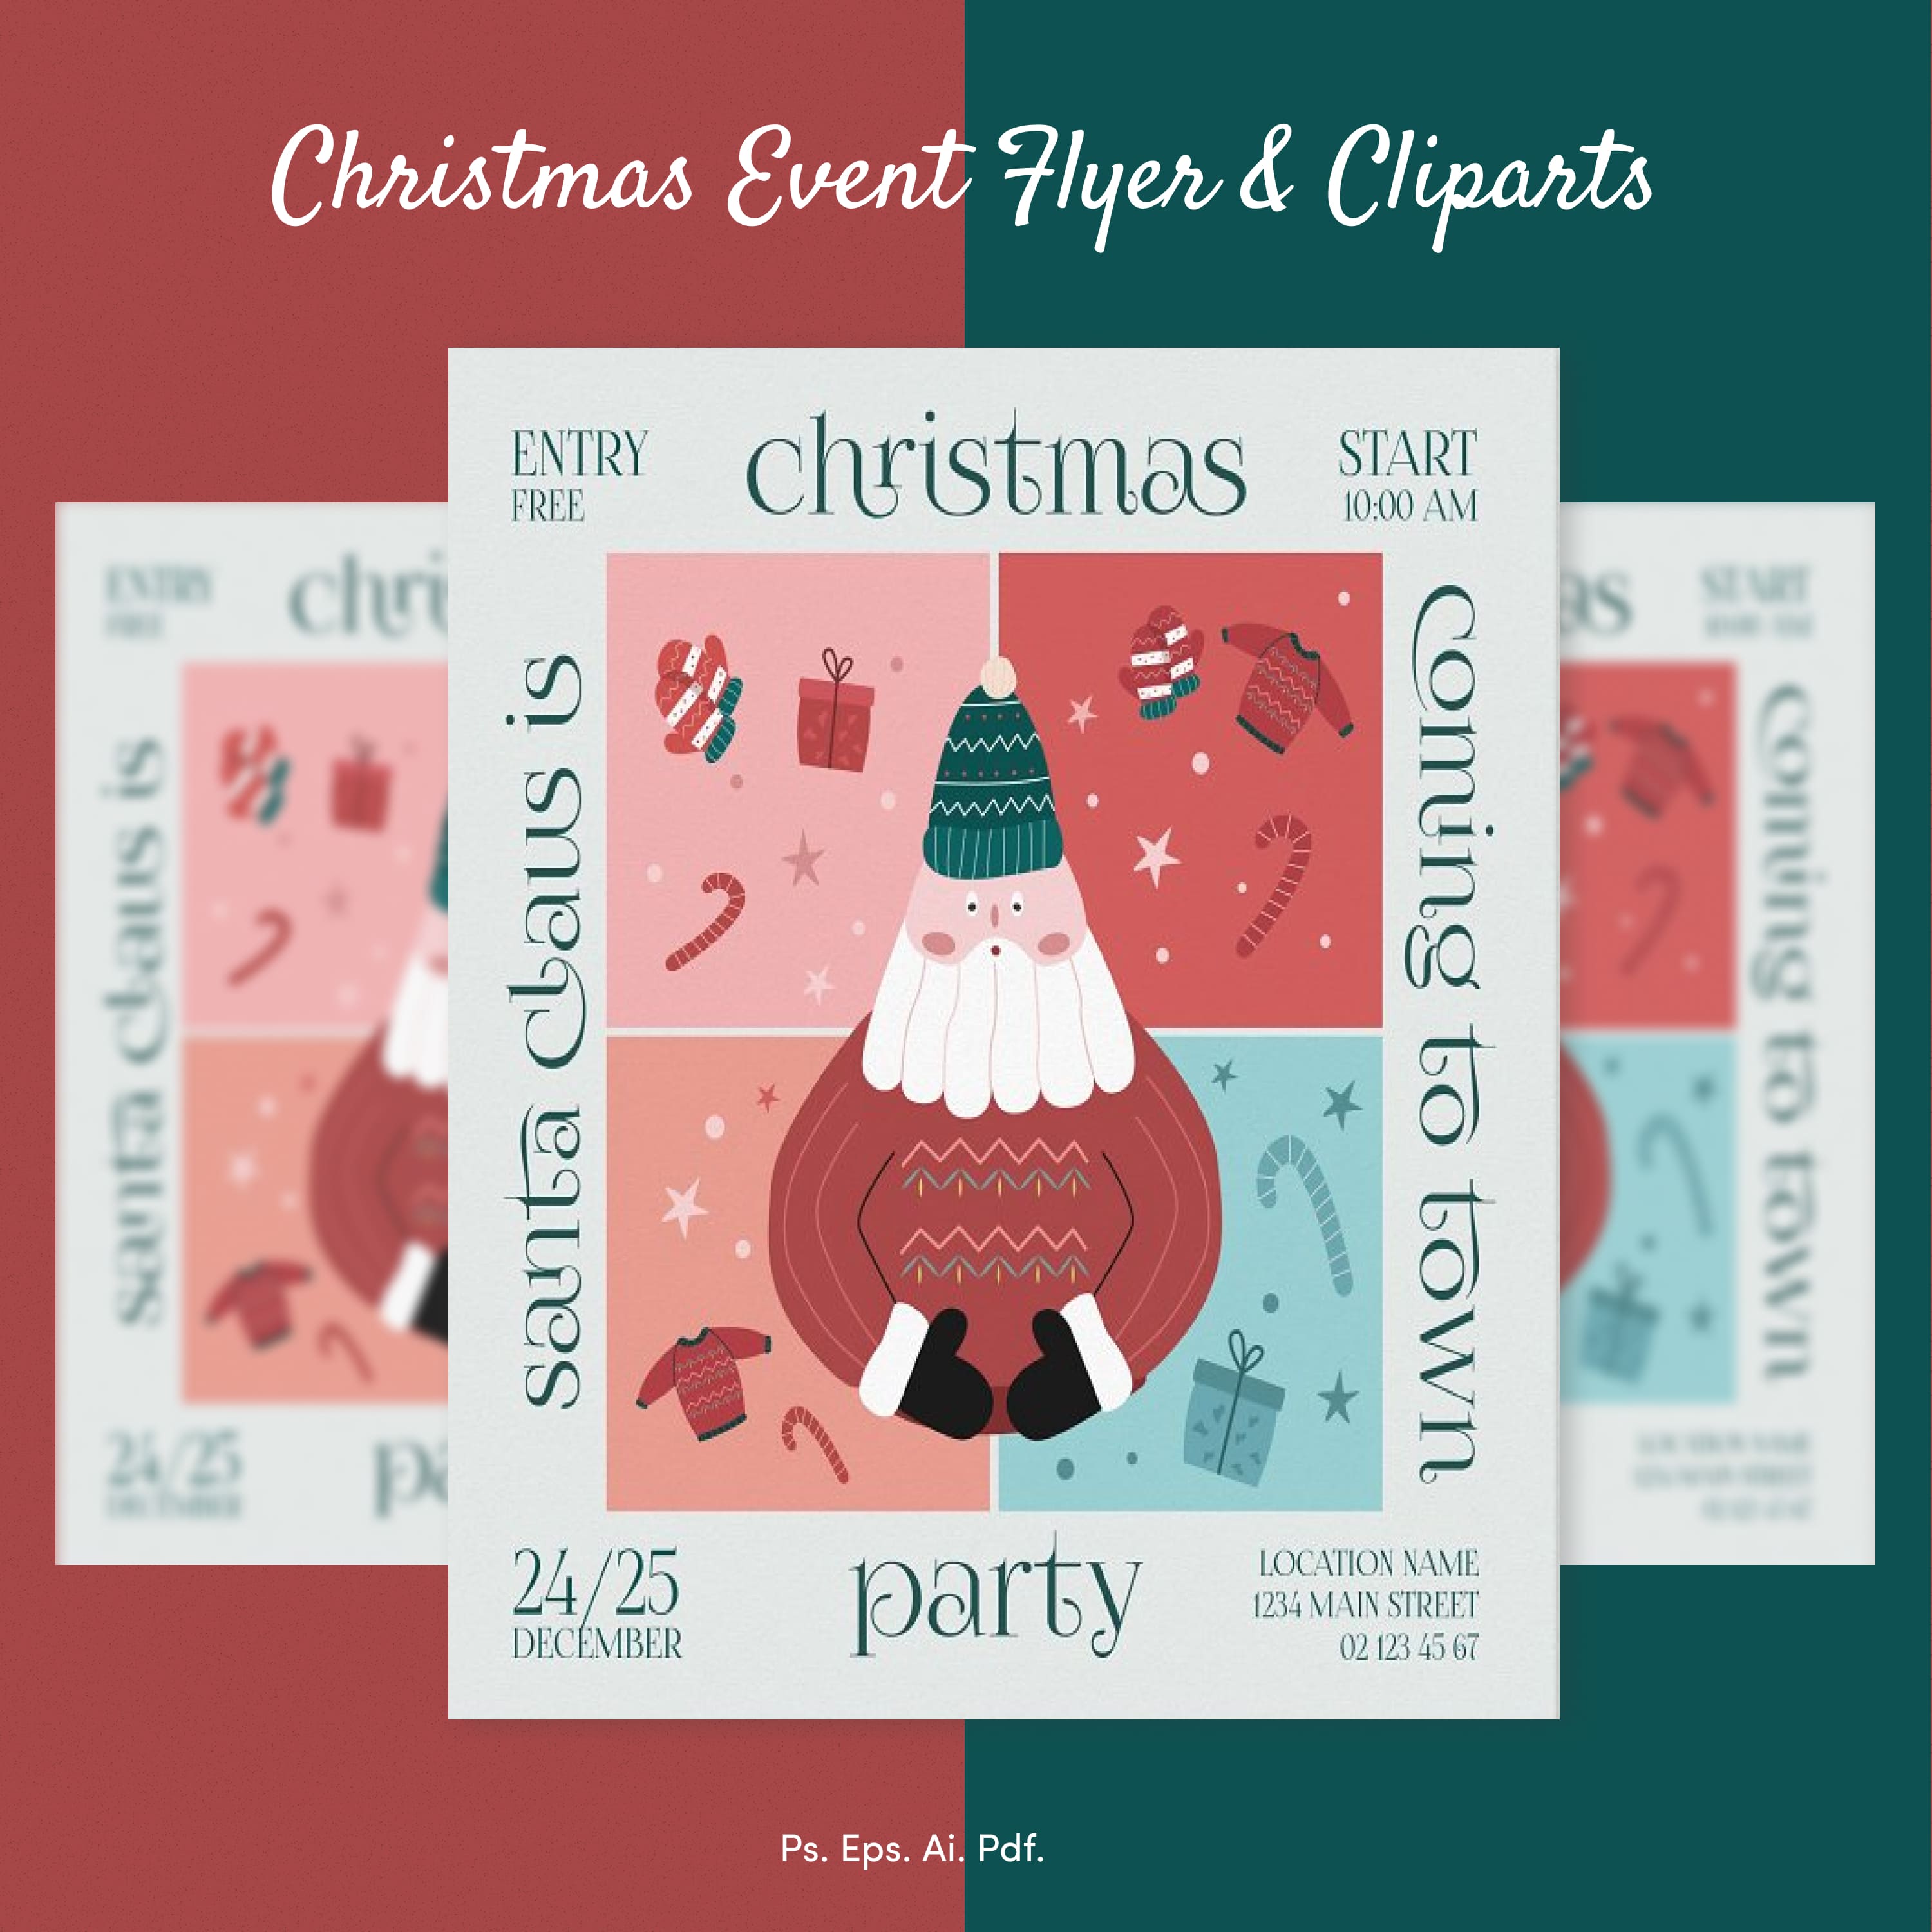 Christmas Event Flyer Cliparts 1500x1500 1.